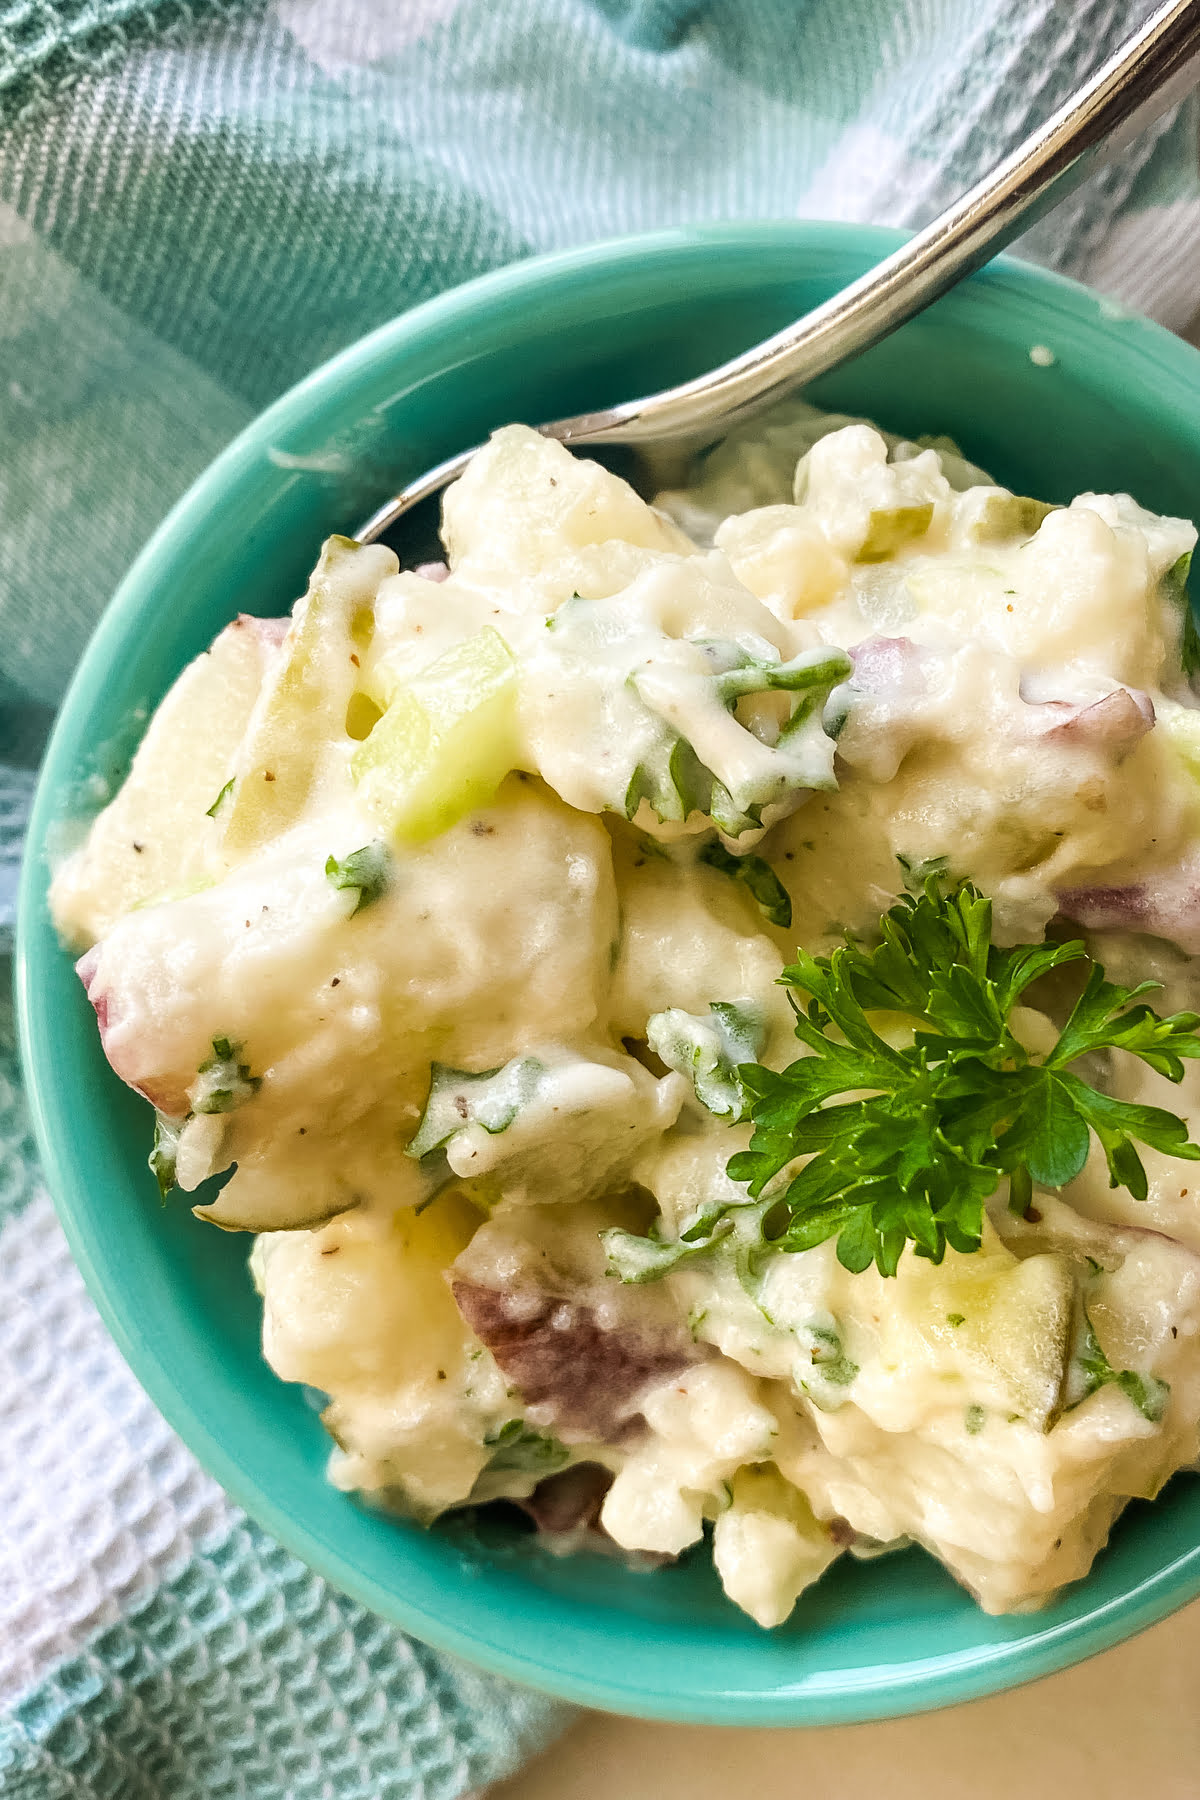 small serving of potato salad with dill pickles